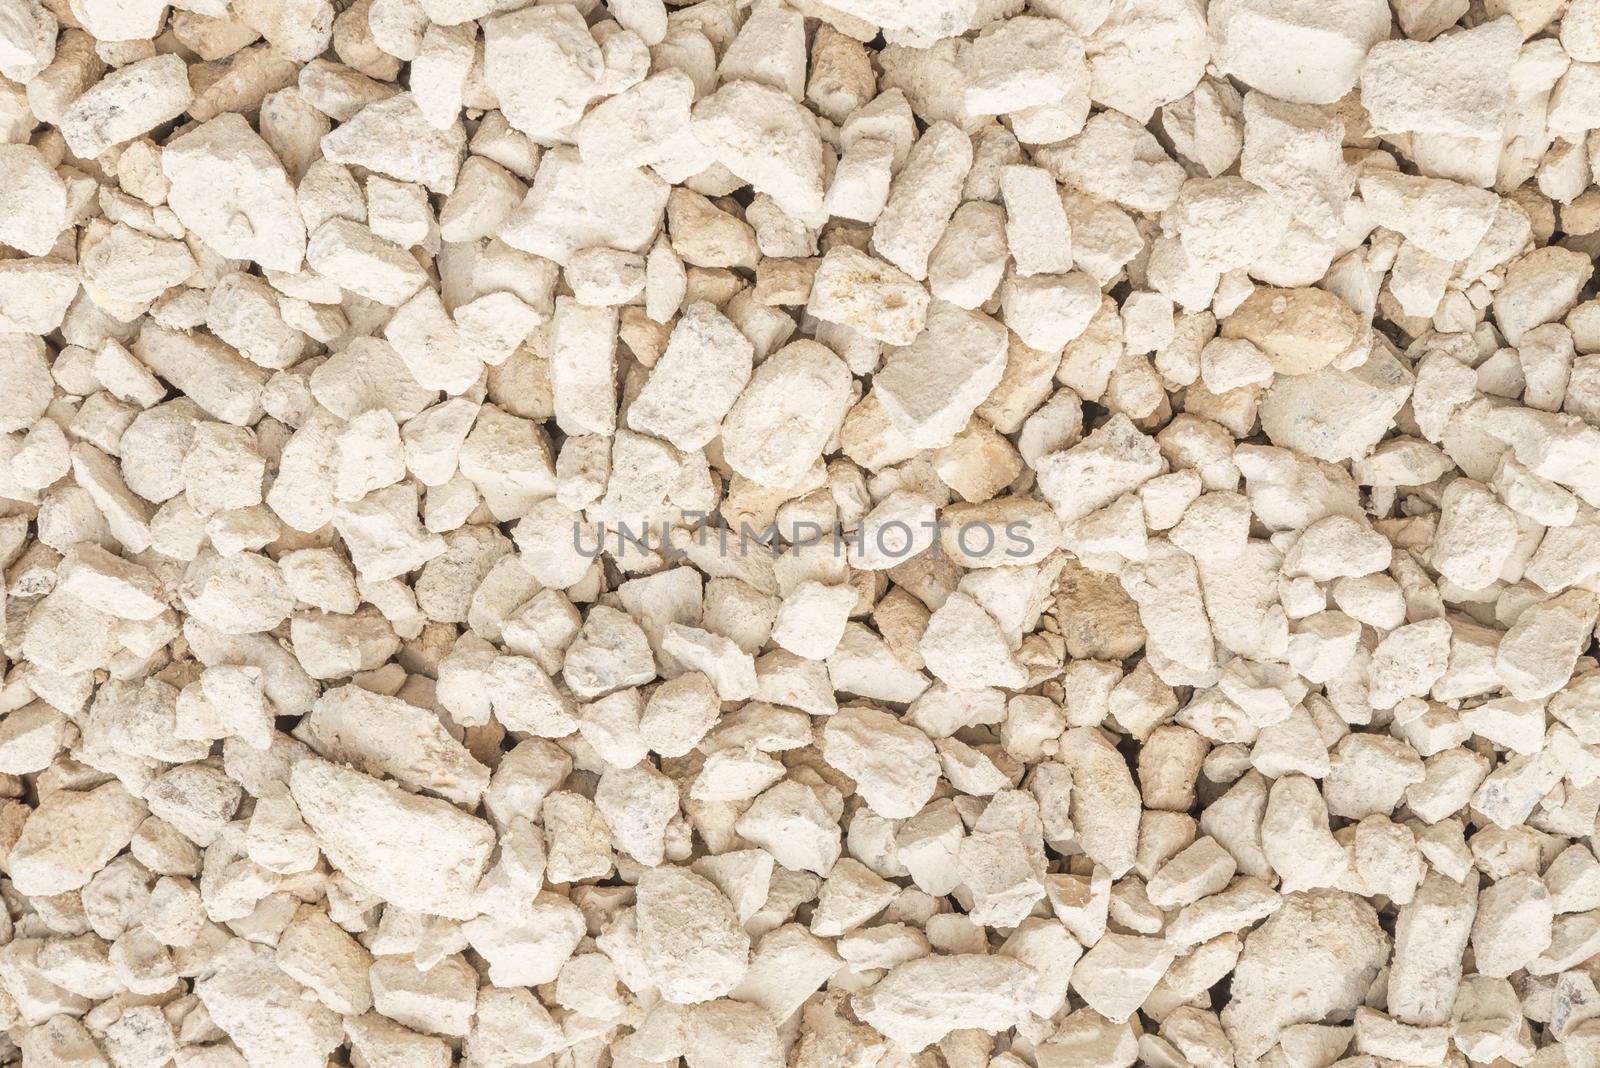 gravel Texture for background and design by Proff